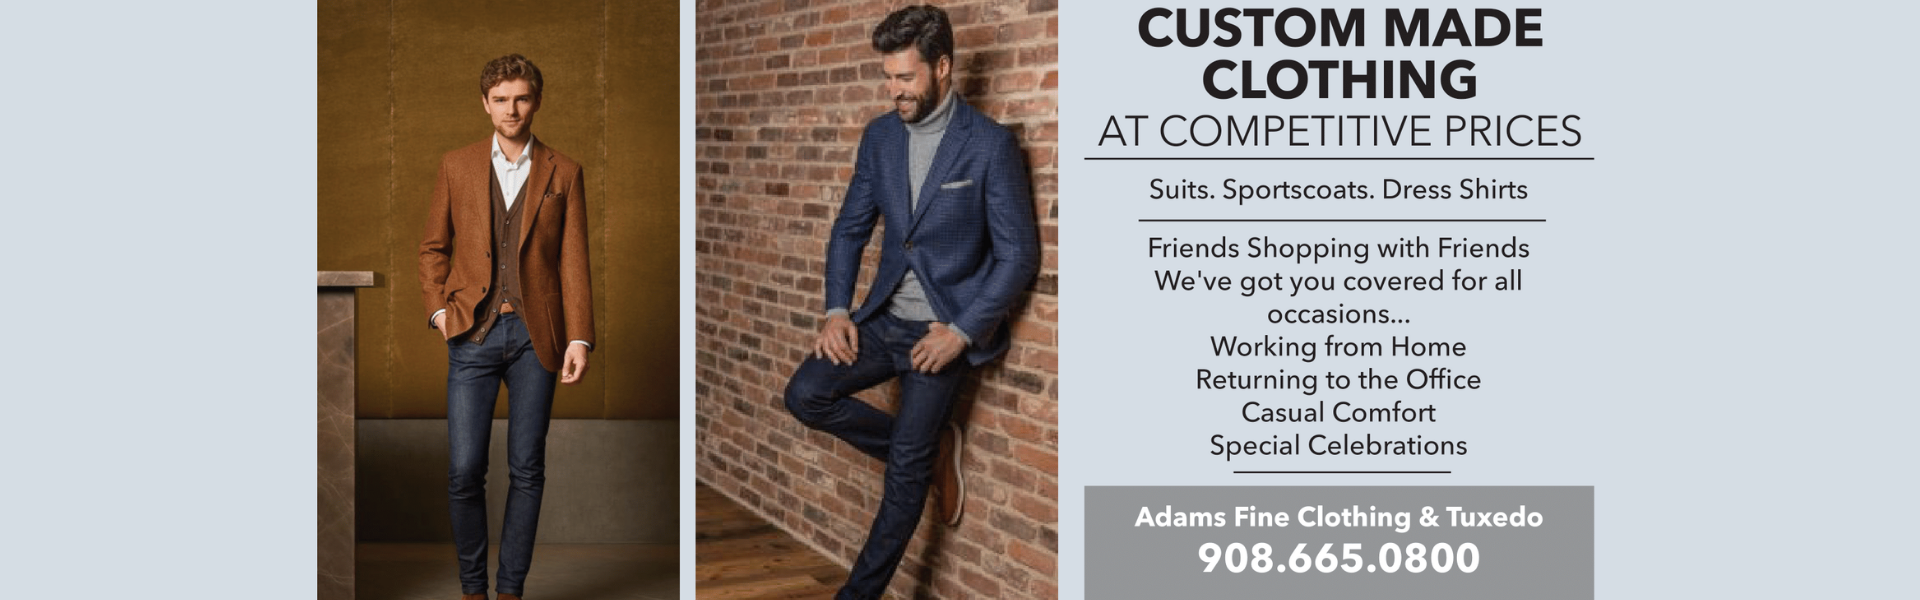 Men's Clothing, Suits and Dress Shirts